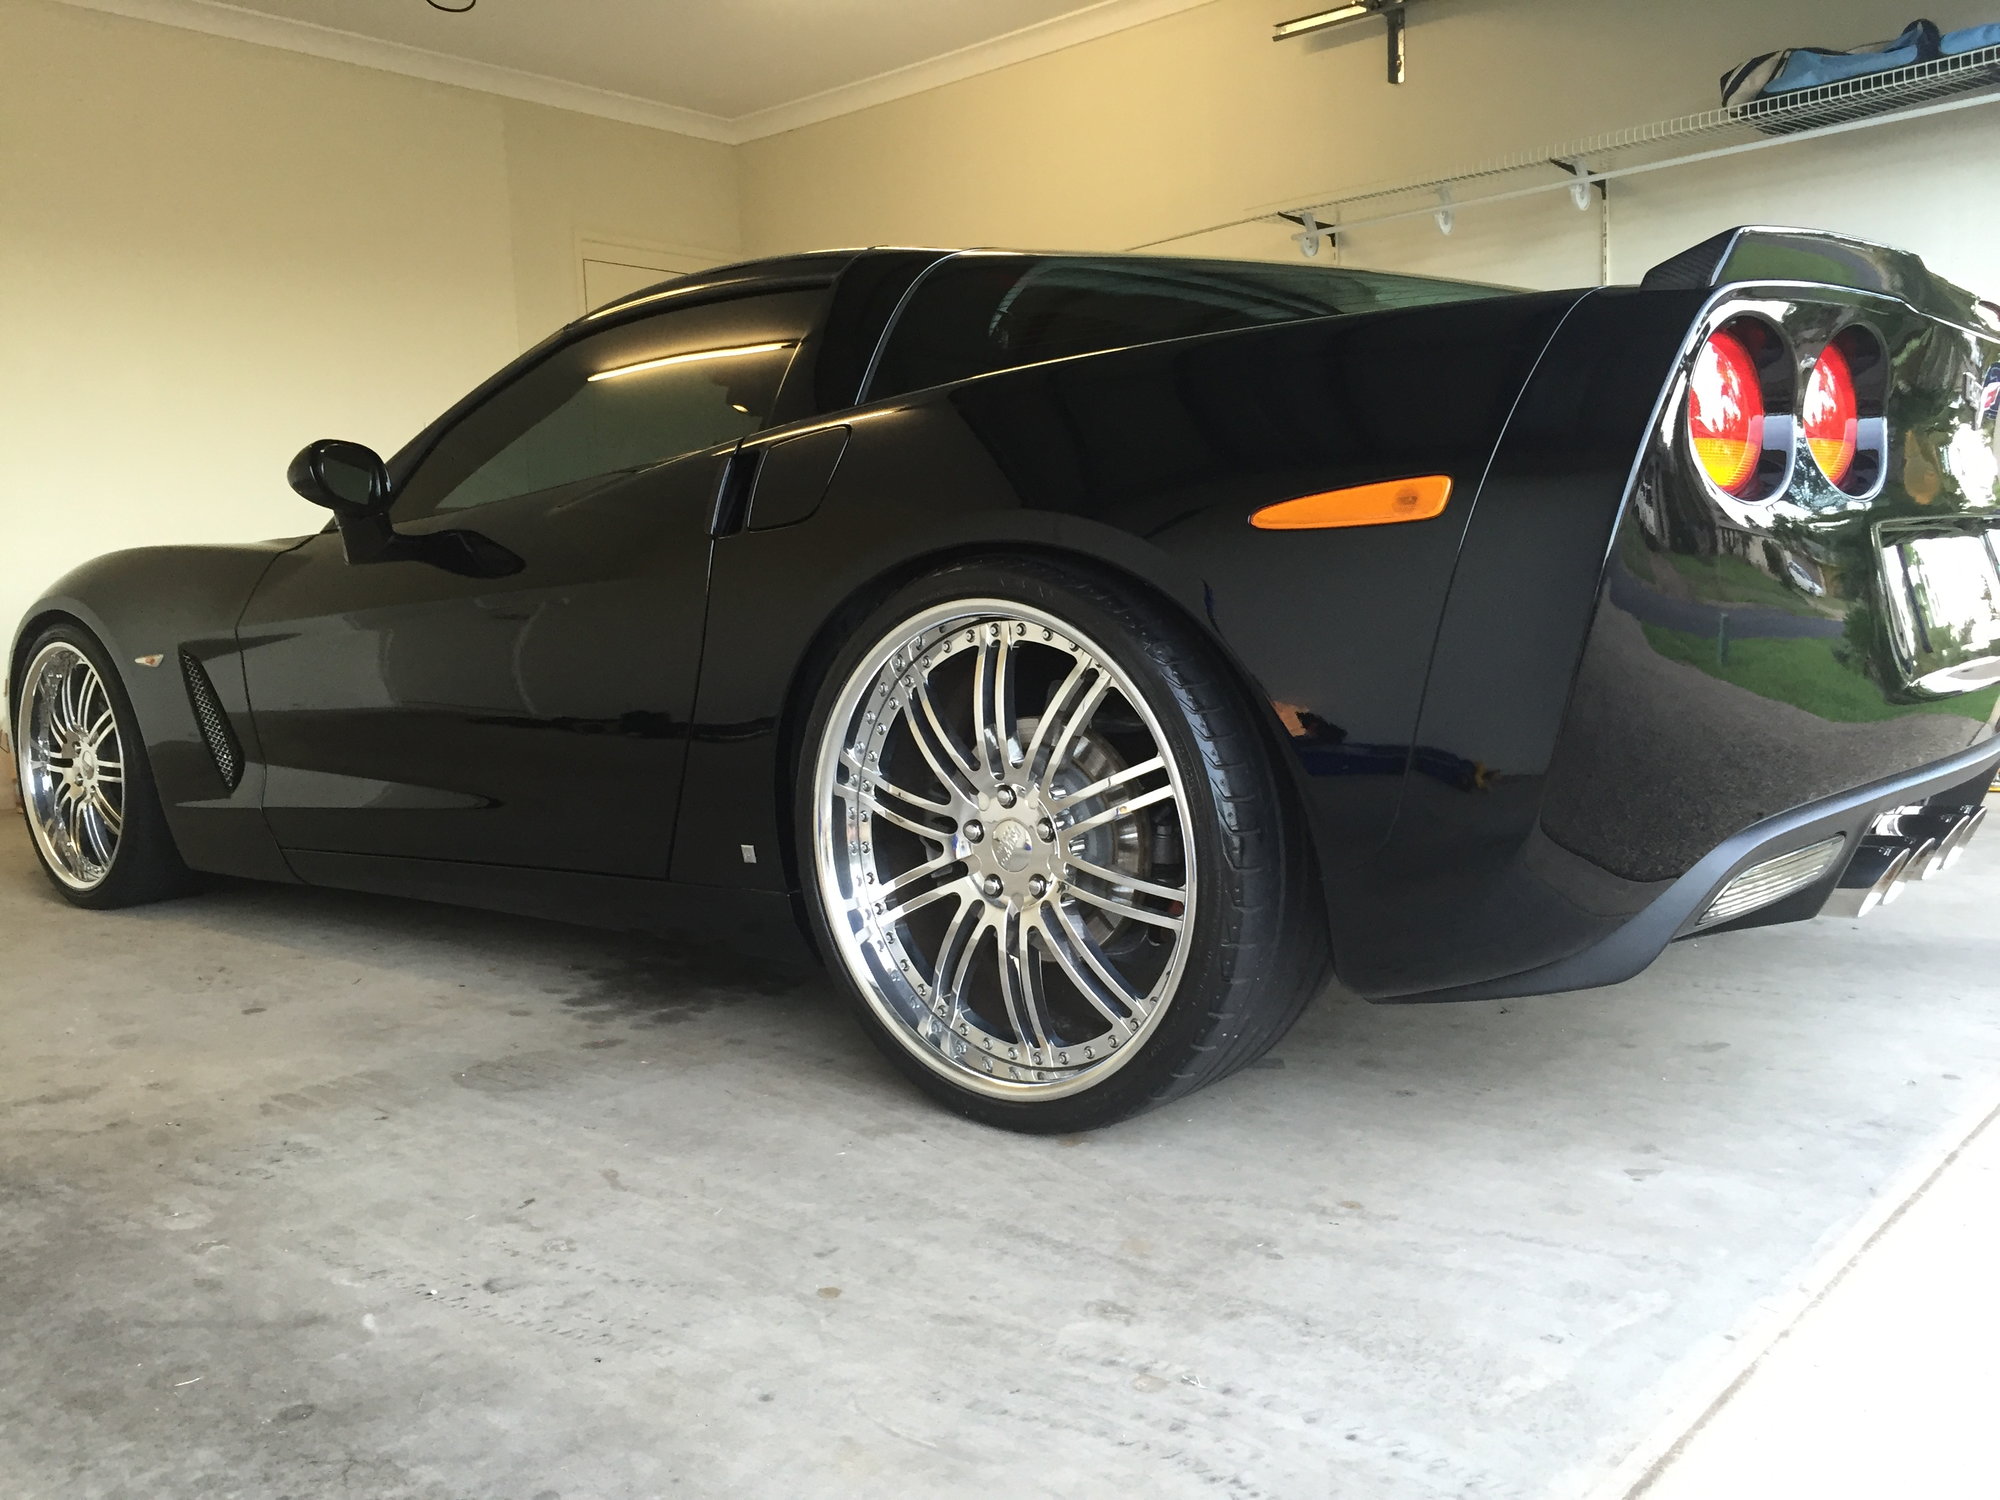 The Offical: C6 Base/Narrow Body Aftermarket Wheels.